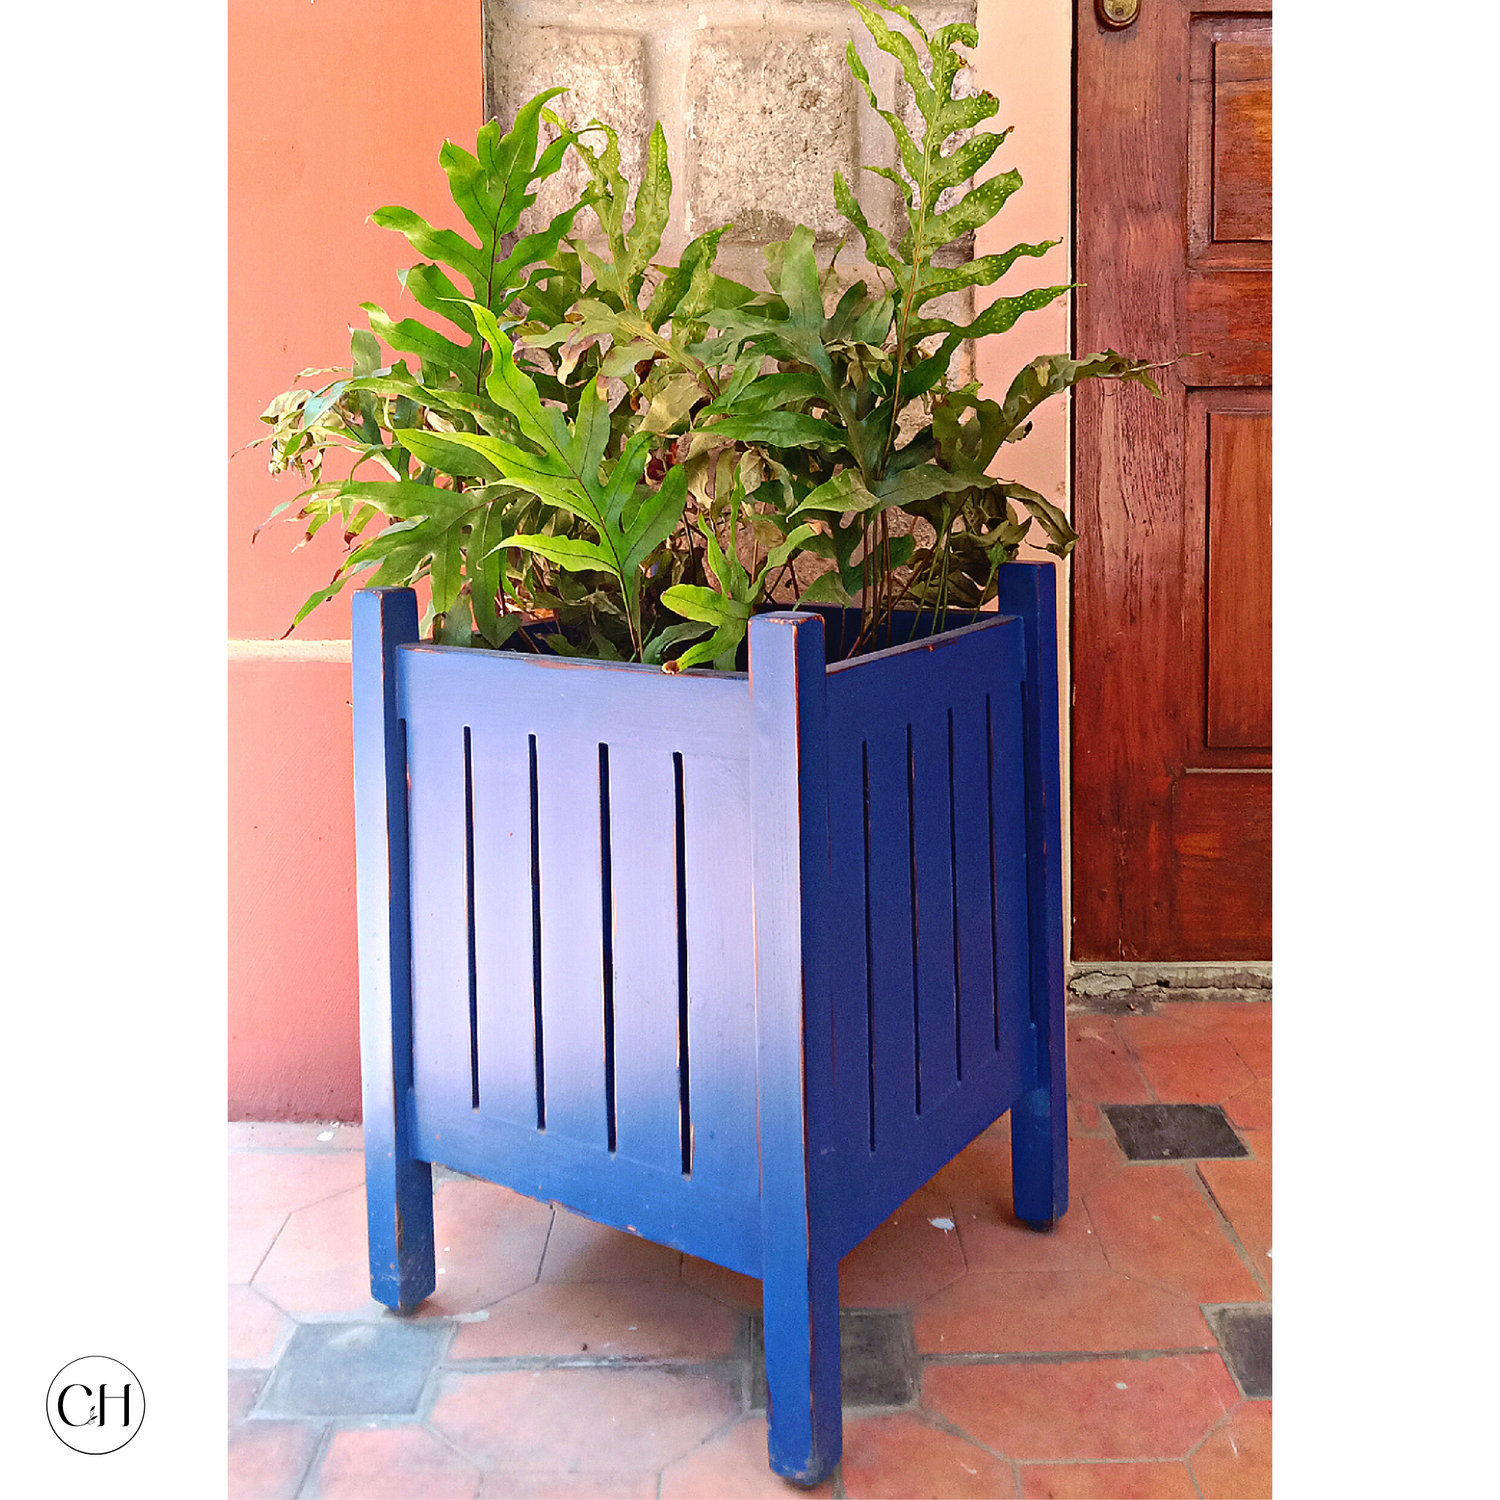 CustHum - Blue rustic wooden planter with slatted design (ISO view)